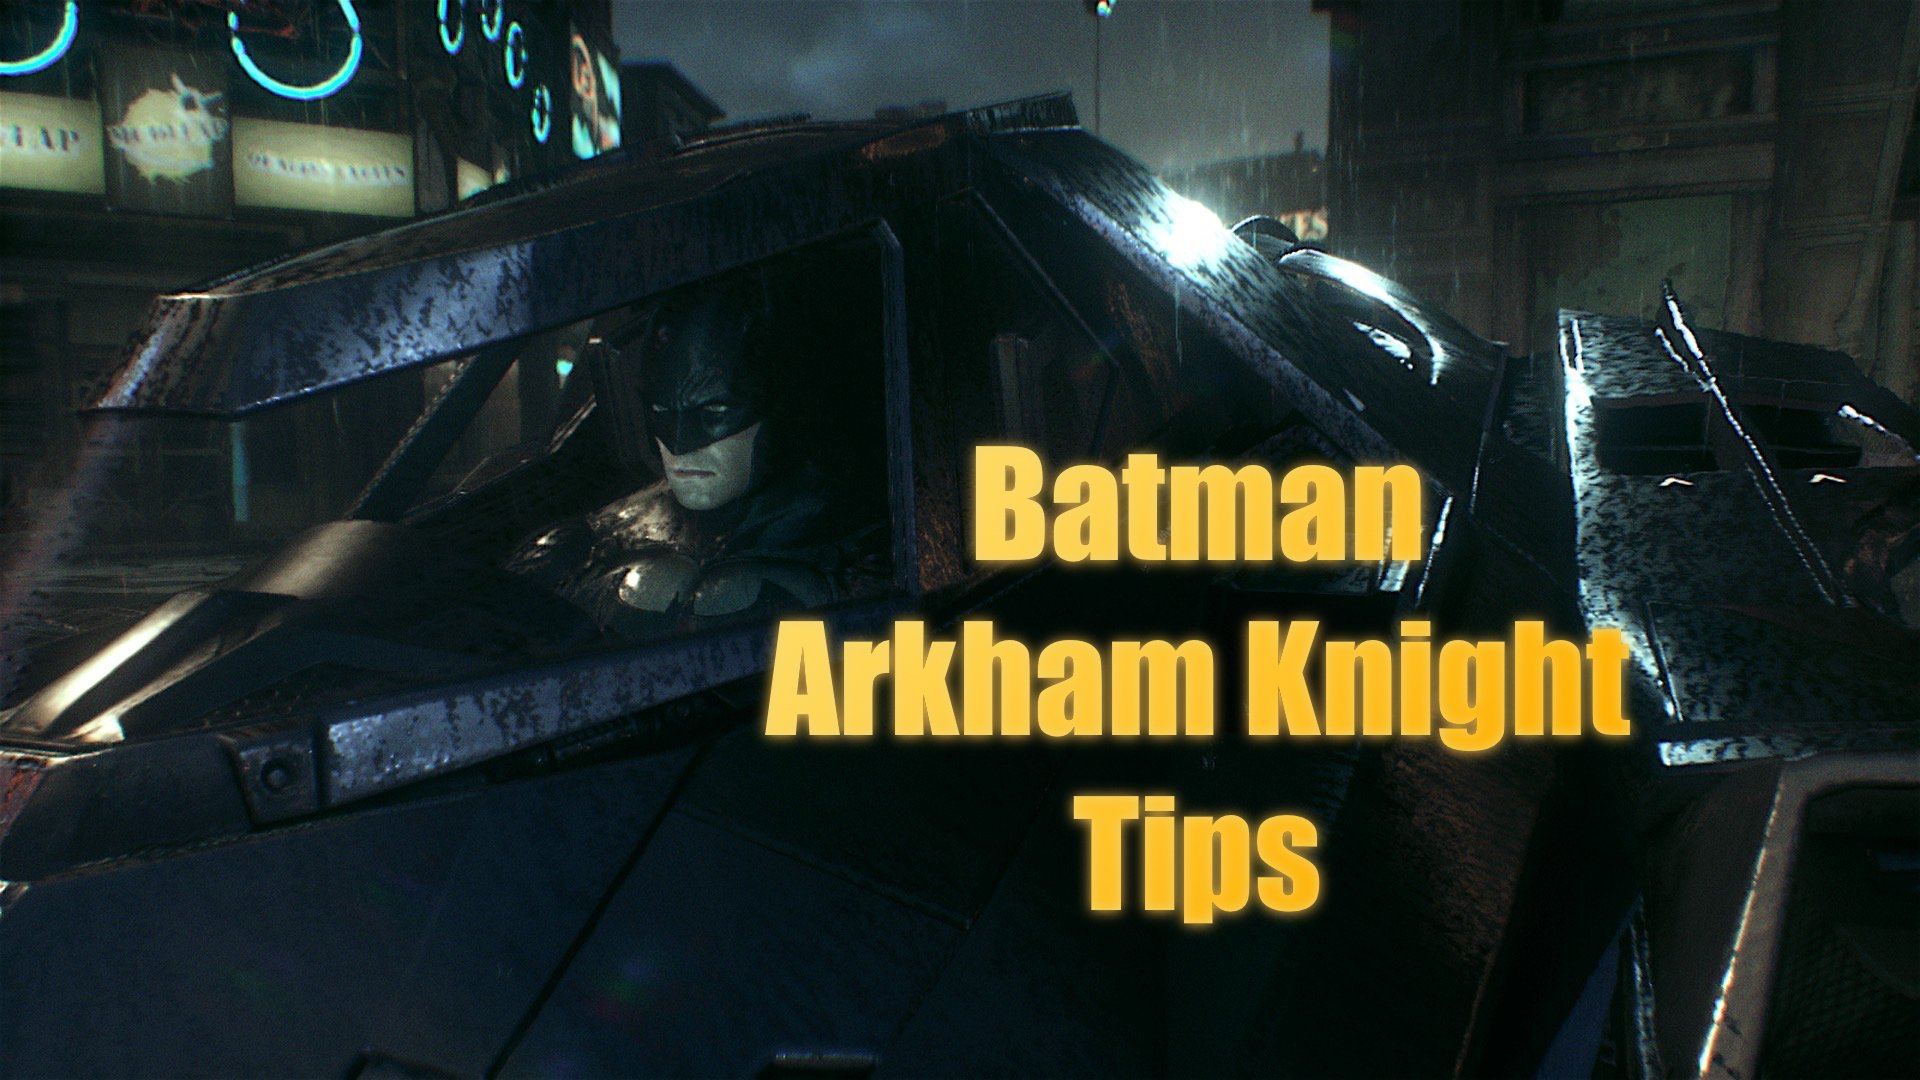 The essential Batman Arkham Knight tips to level up faster.